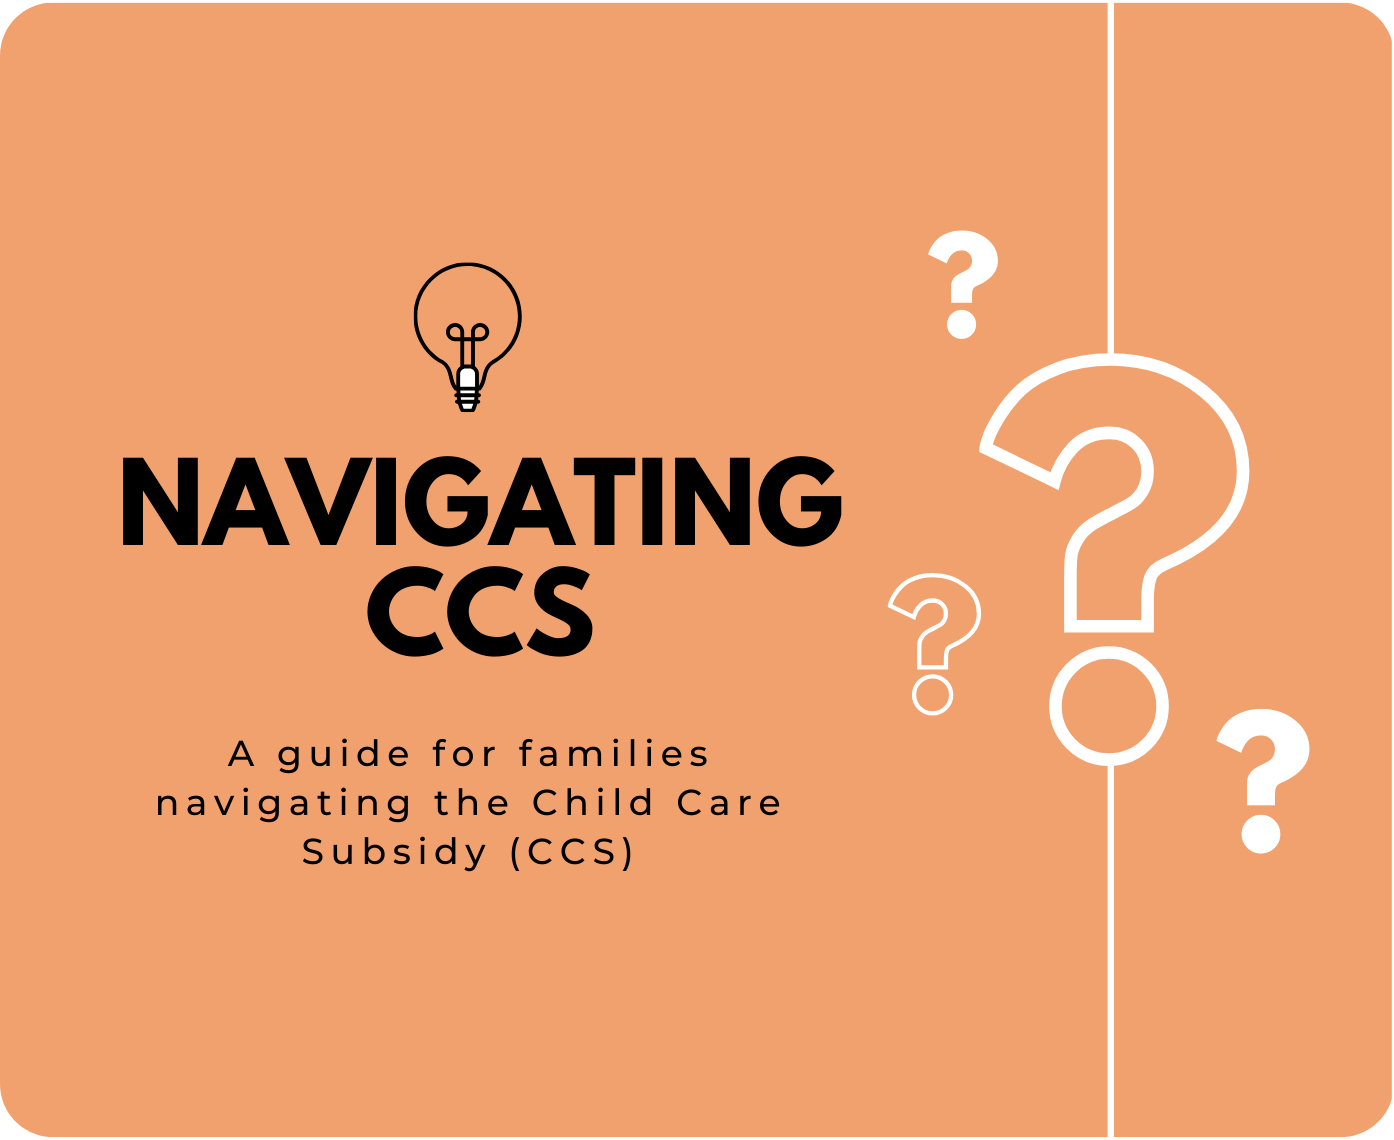 Navigating CCS a guide for families